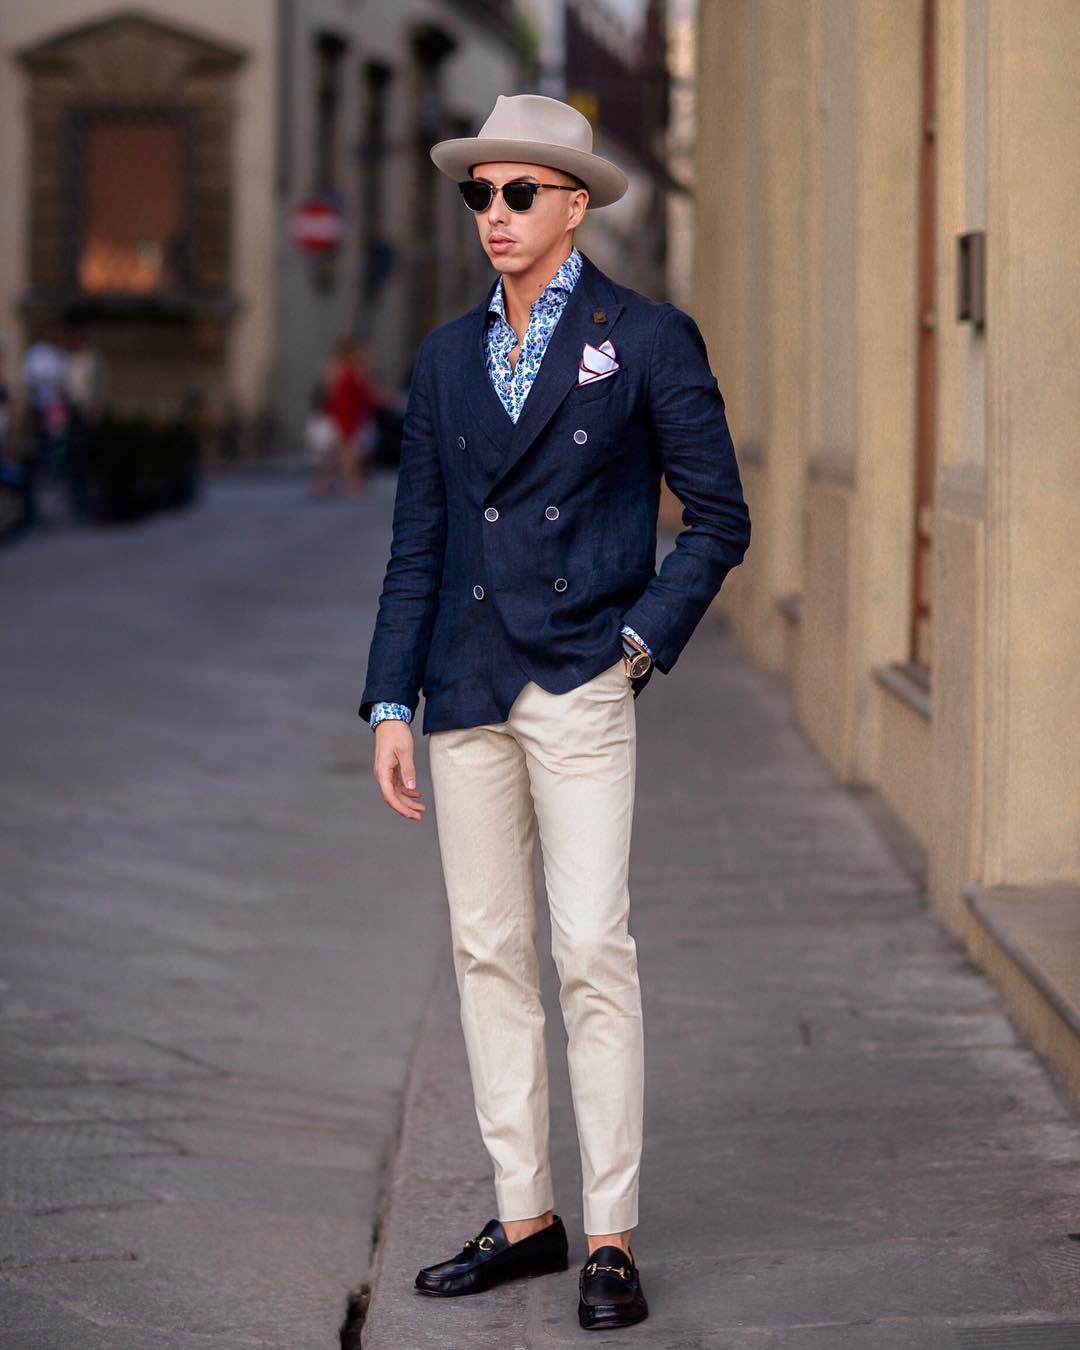 Love wearing beige pants? Look no further. We've curated 5 most amazing beige outfit ideas for men that you won't want to try. #beige #pants #outfits #mens #fashion #street #style